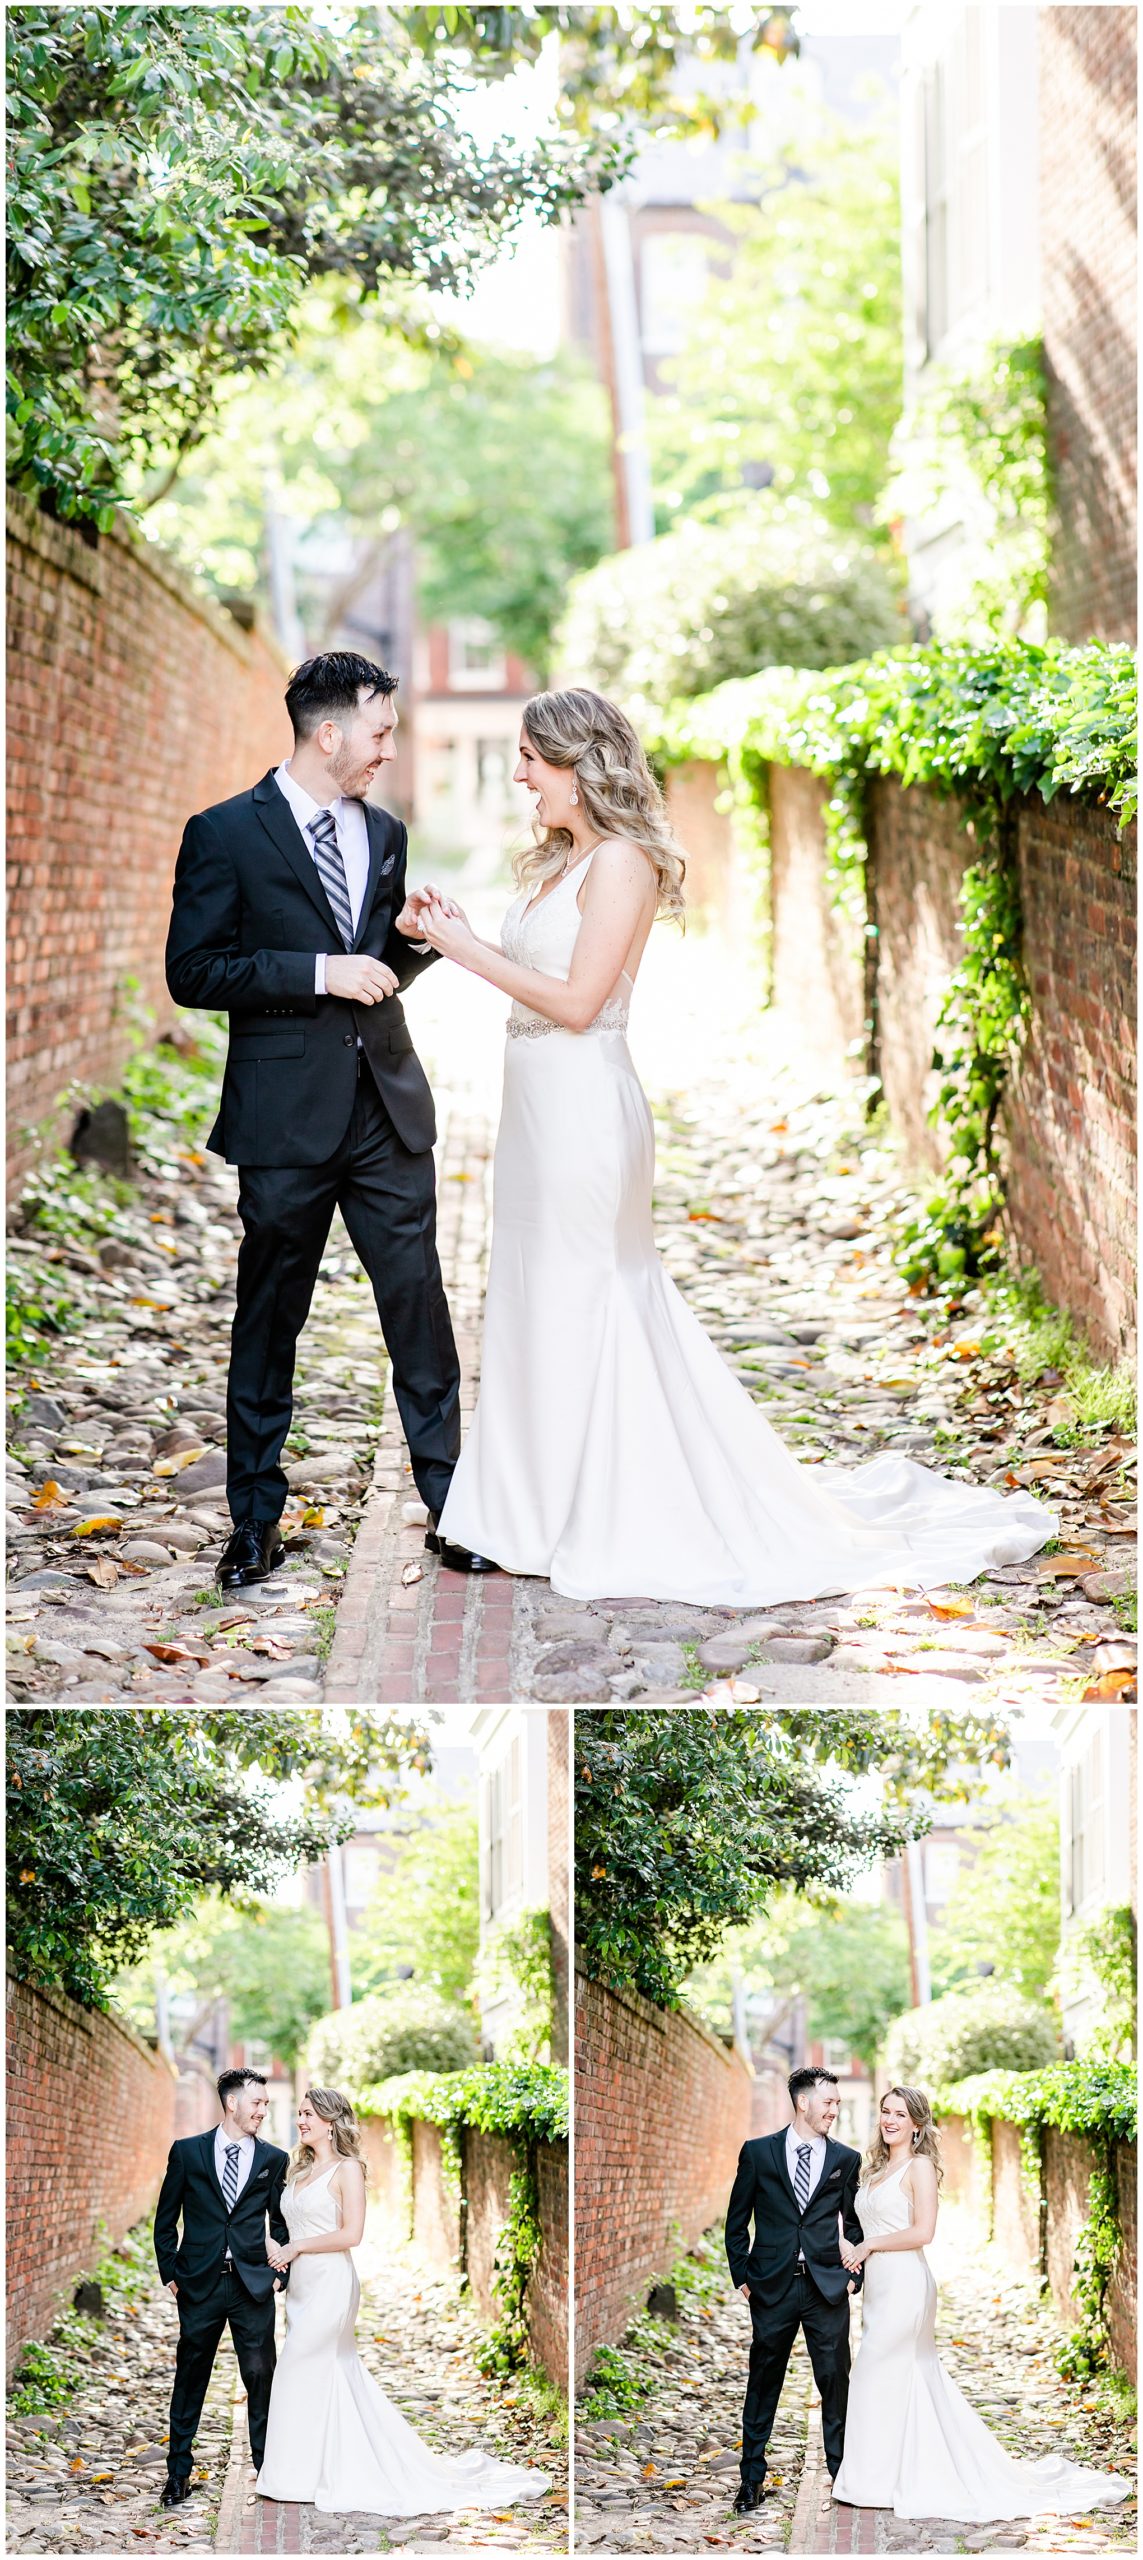 glowing spring Alexandria elopement, Alexandria wedding photographer, Old Town wedding photographer, Old Town Alexandria, Old Town wedding, spring wedding, DC area wedding, DC wedding photographer, Rachel E.H. Photography, classic bride and groom